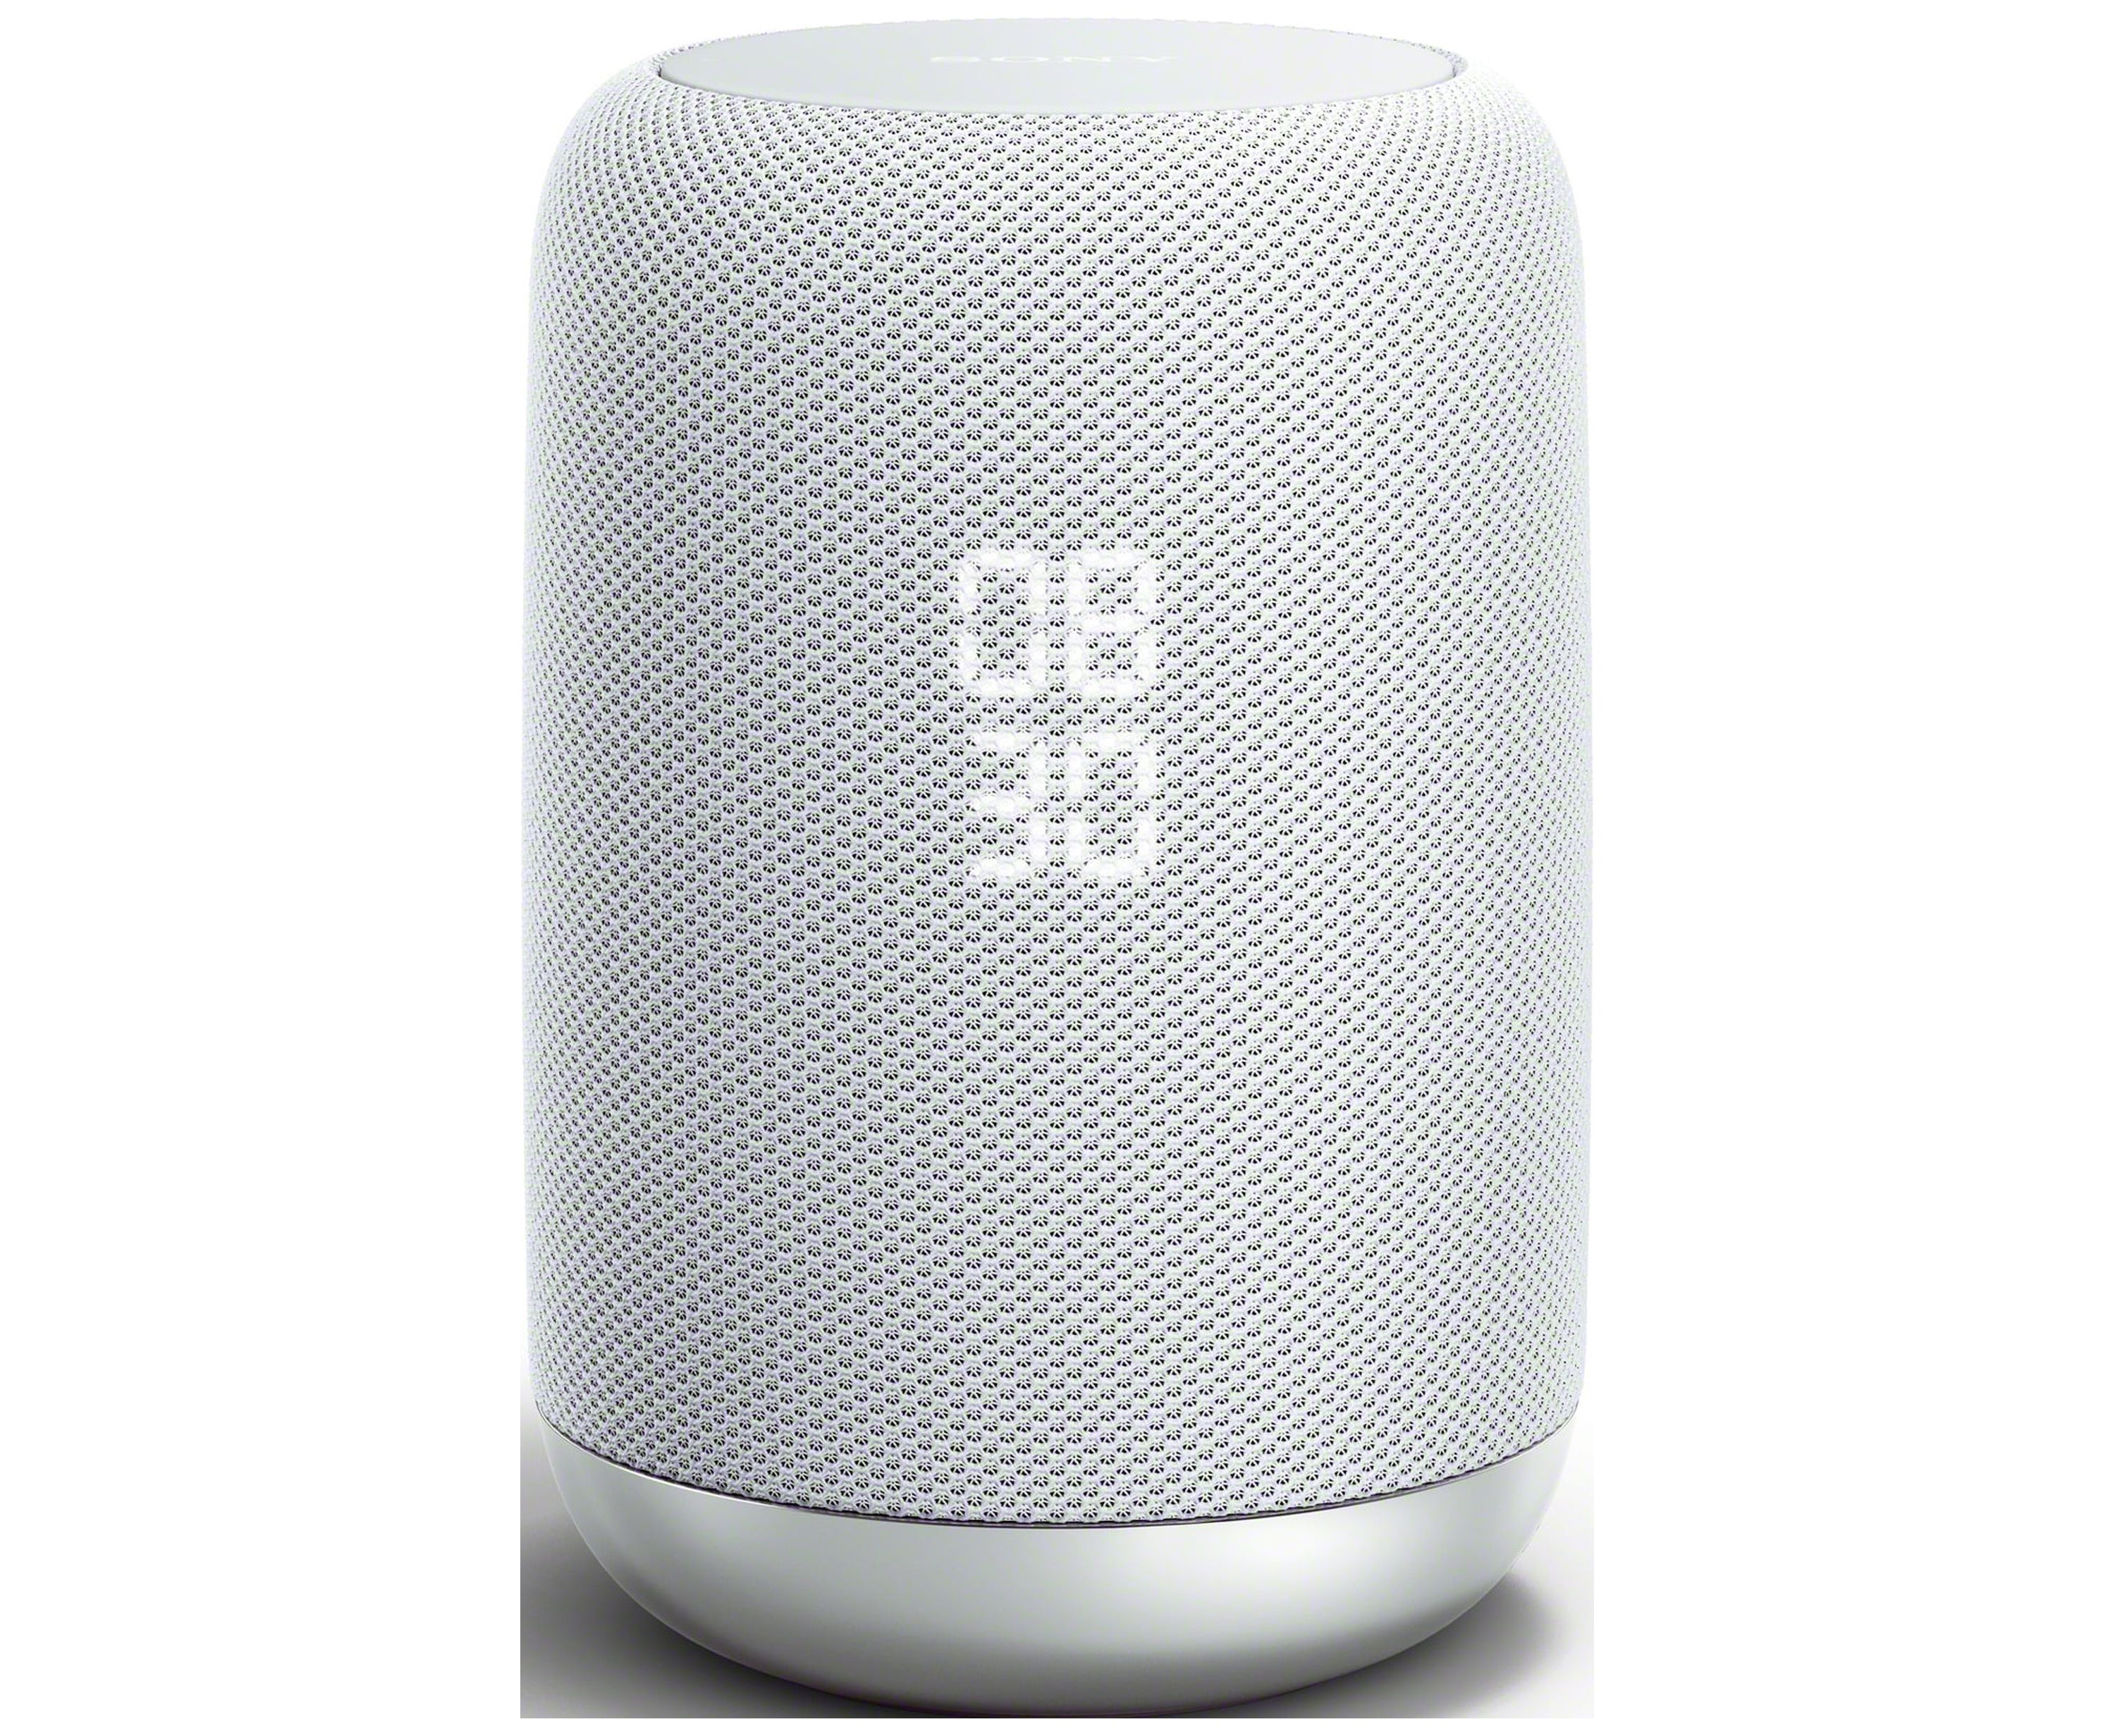 Sony Smart Speaker LFS50G with Google Assistant Built In- White - image 1 of 10